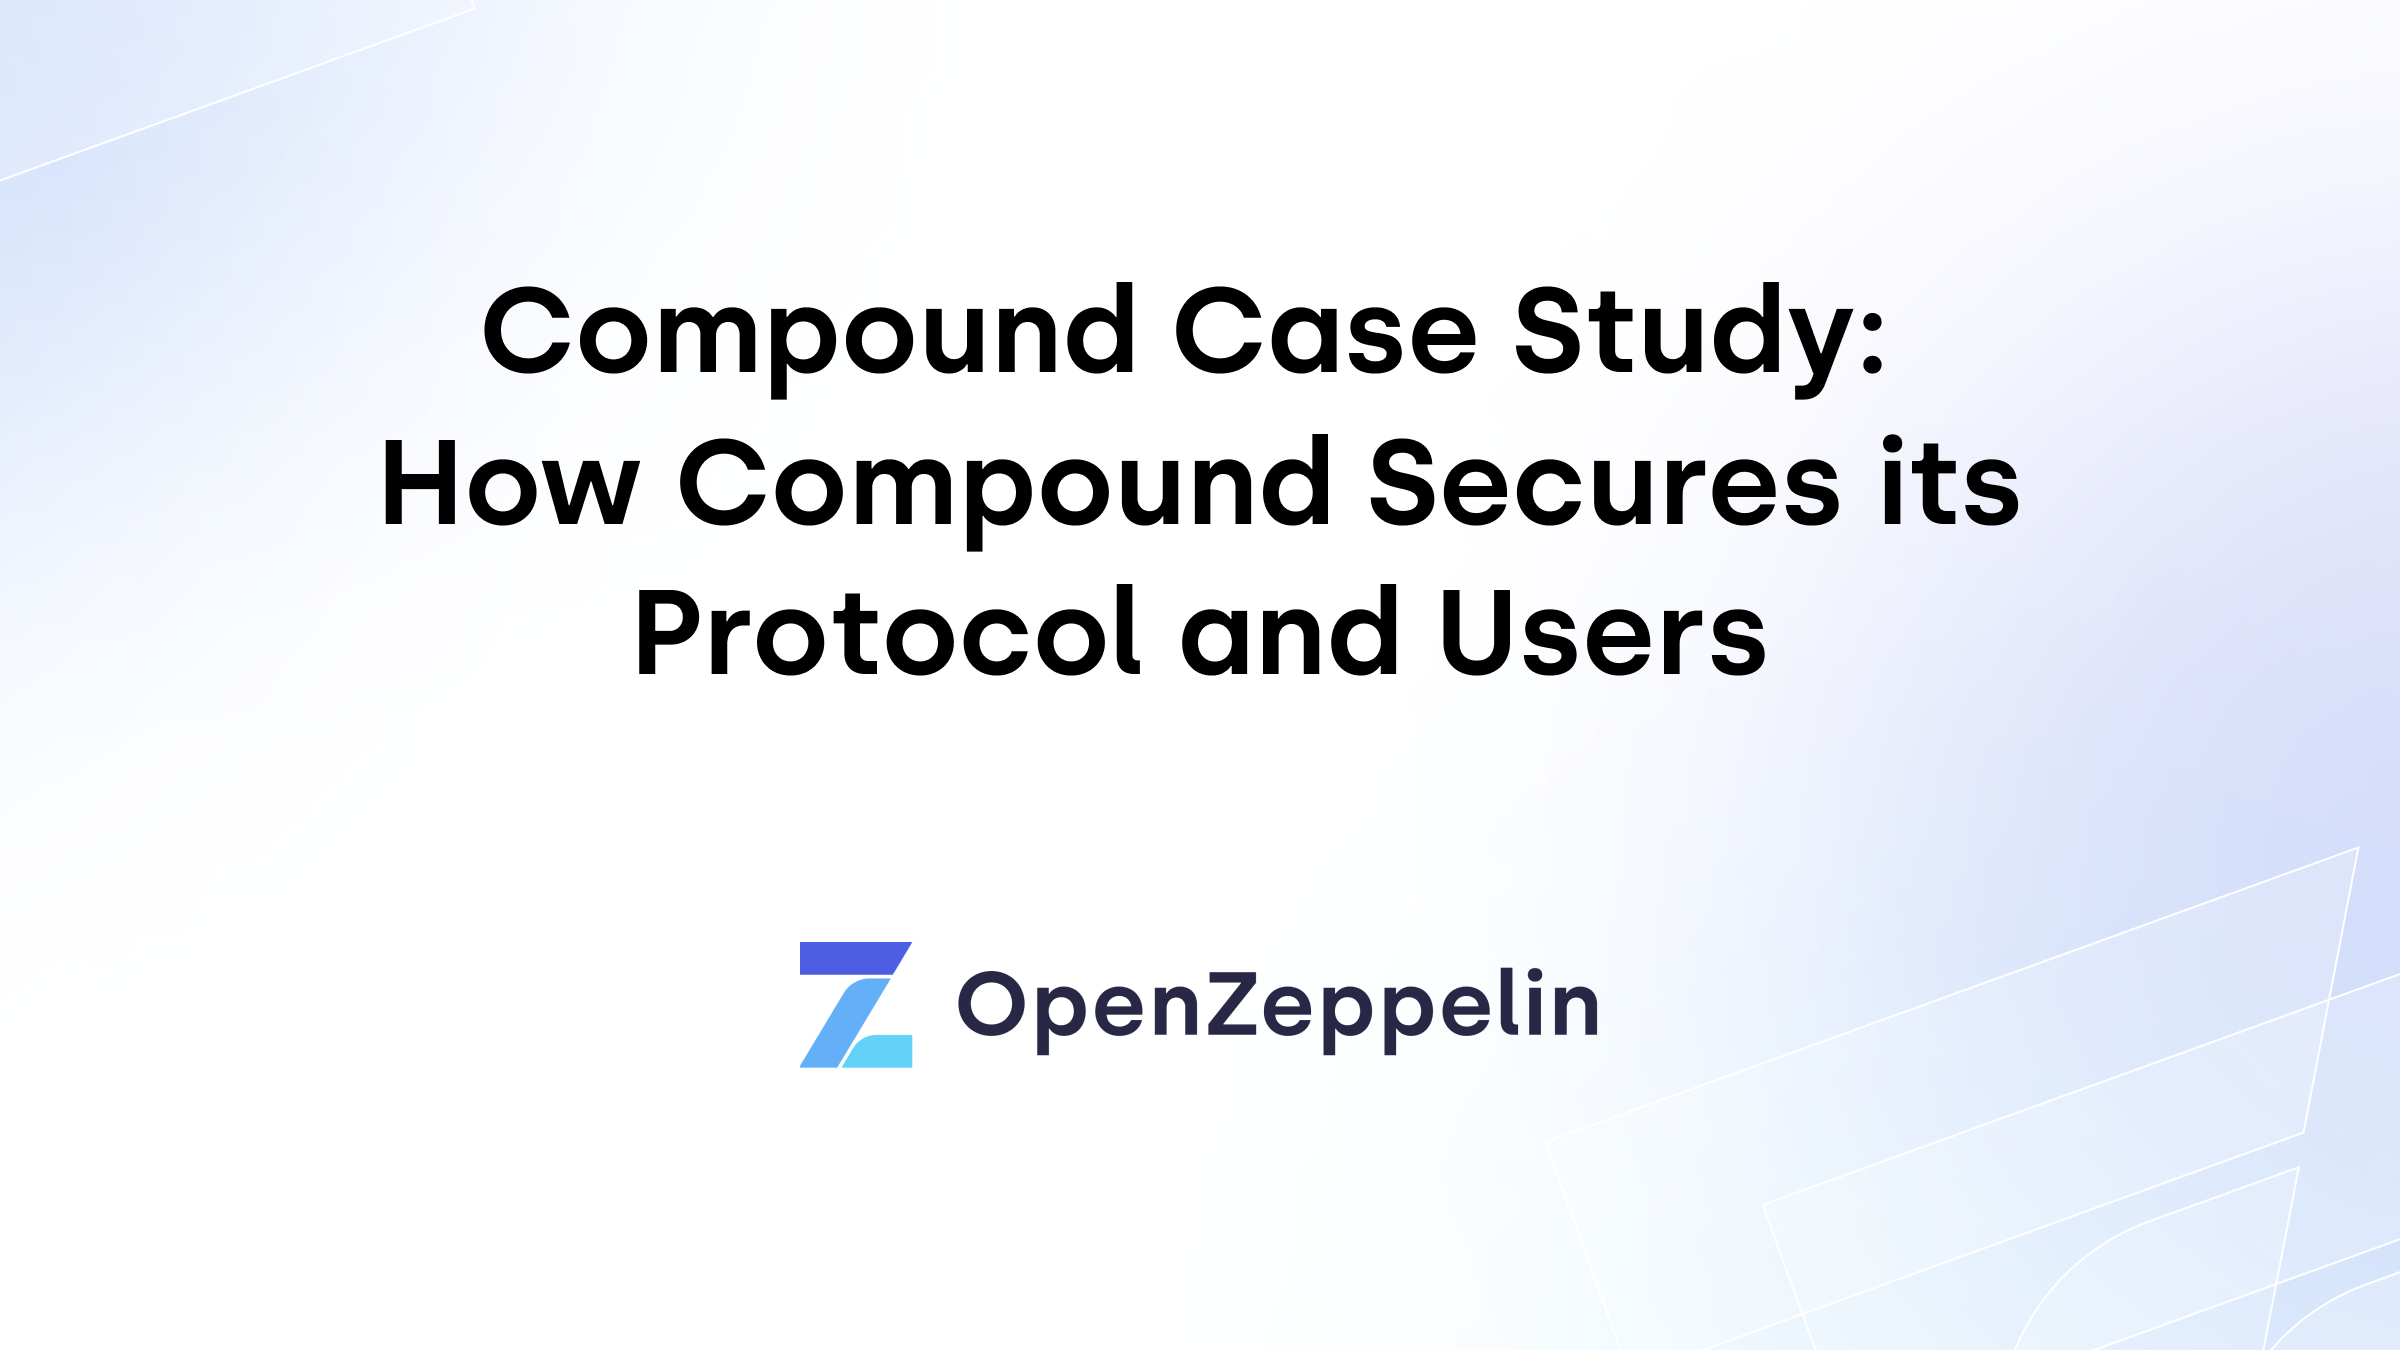 Compound Case Study: How Compound Secures its Protocol and Users Featured Image